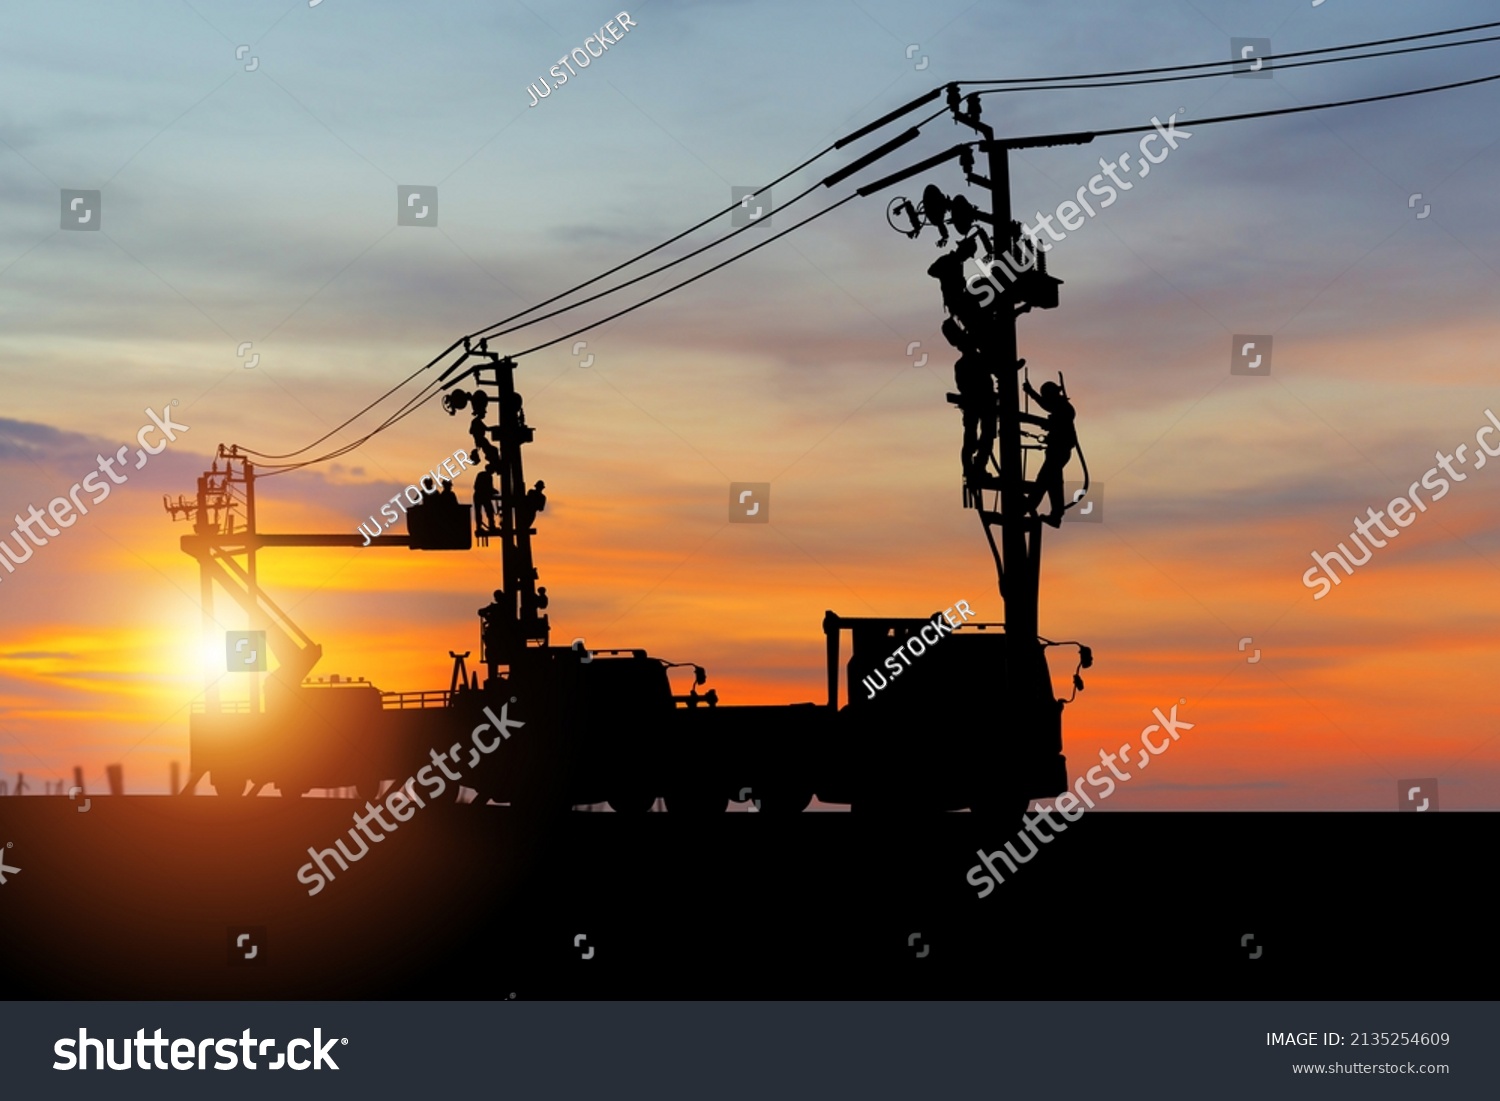 Silhouette of Electrician officer climbs a pole and uses a cable car to maintain a high voltage line system, Shadow of Electrician lineman repairman worker at climbing work on electric post power pole #2135254609